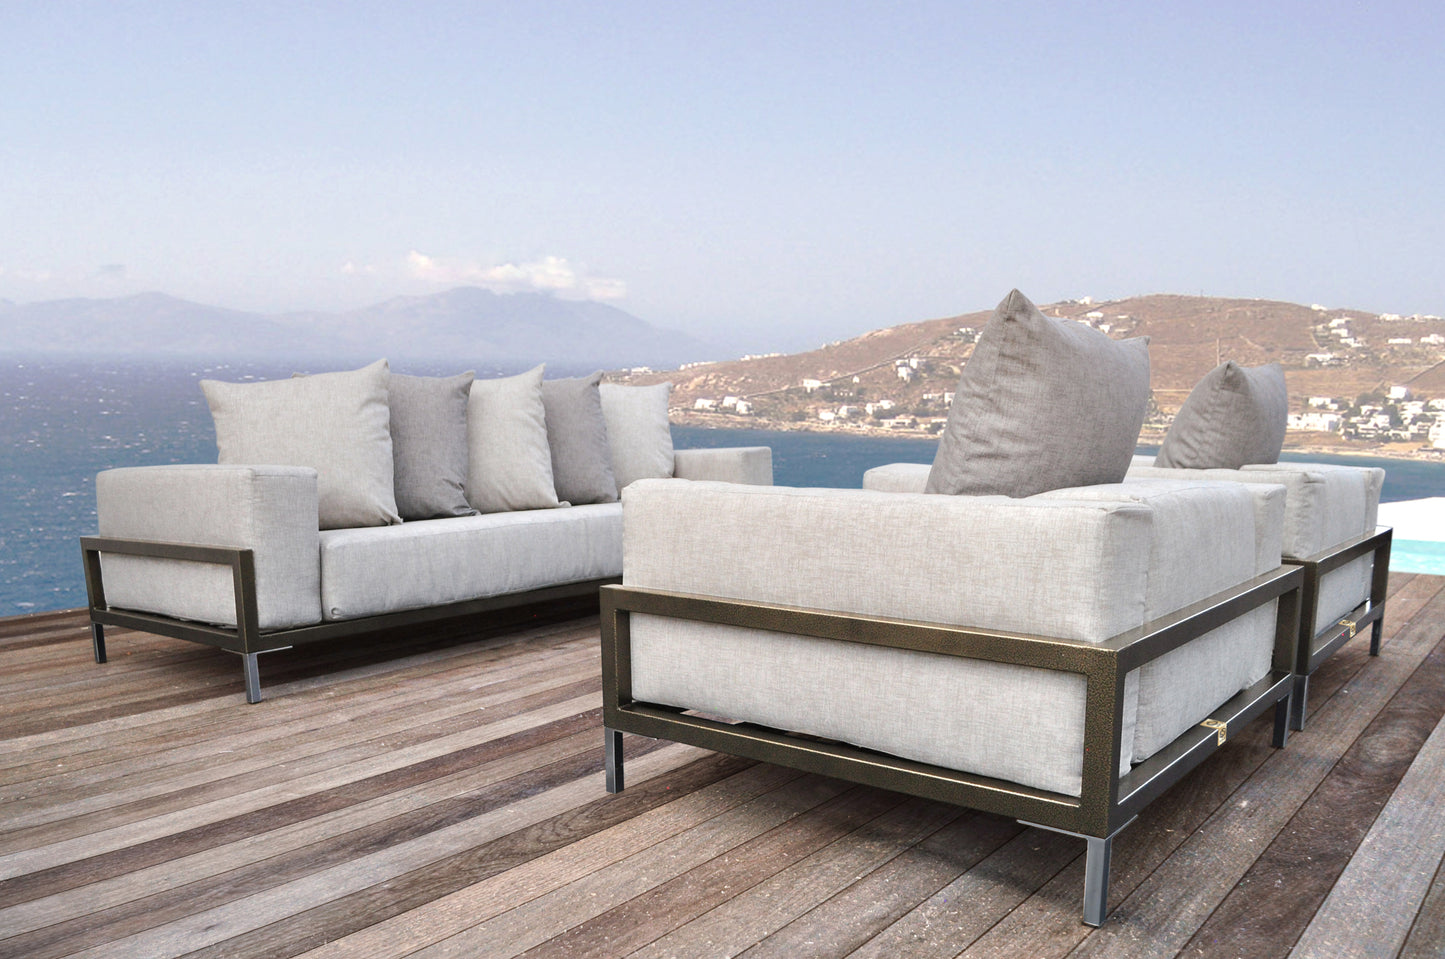 Nubis Outdoor 3-Piece Sofa and Chairs Set